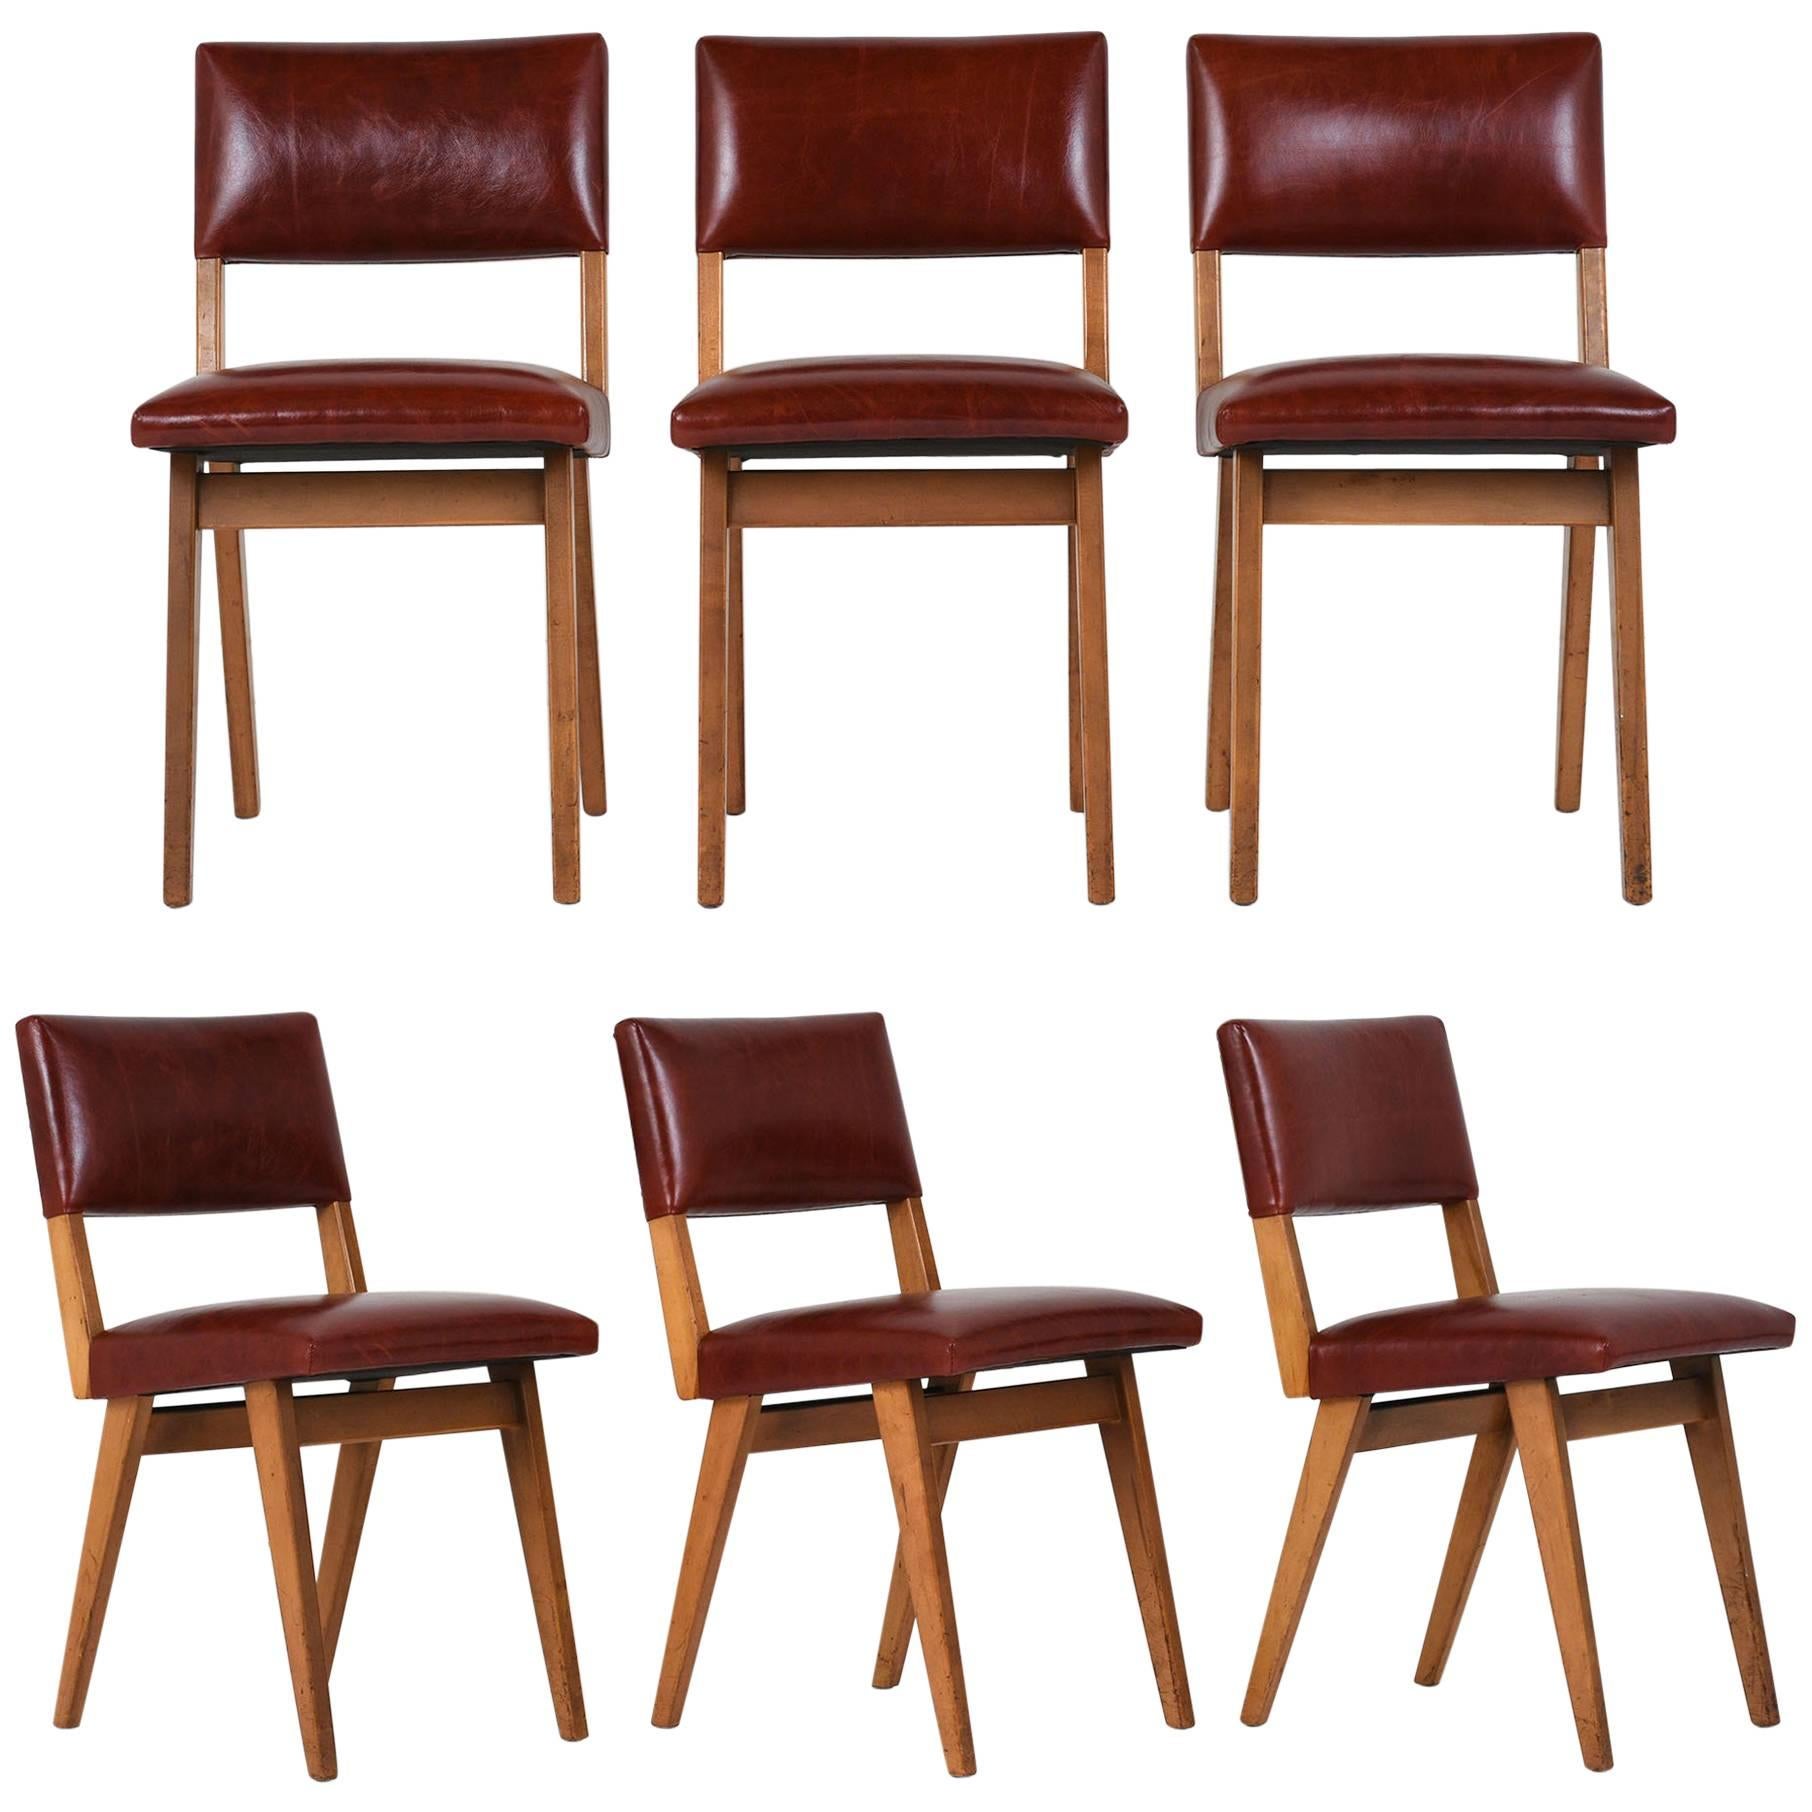 Set of Six Mid-Century Modern-Style Dining Chairs